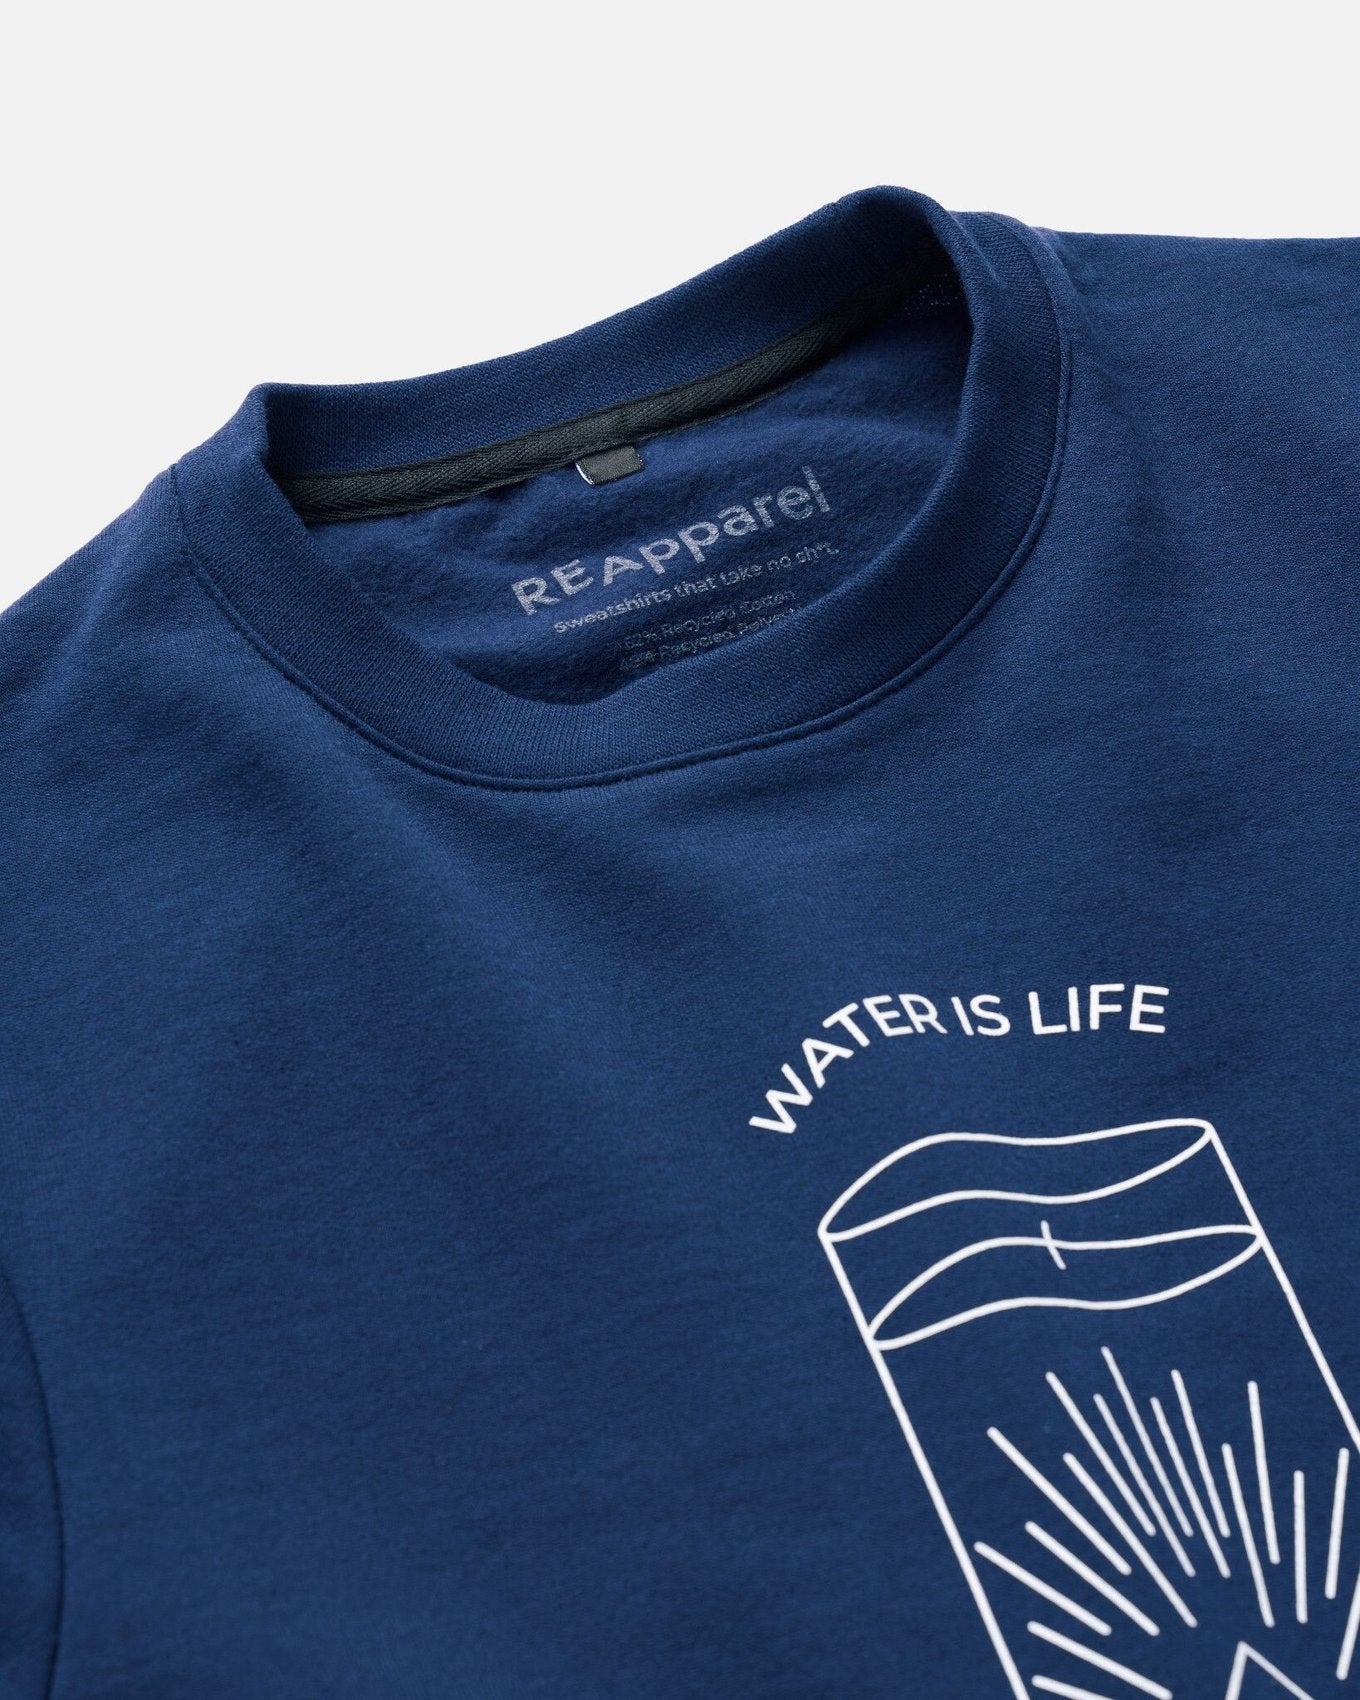 ReApparel Water Crew Neck . in color Navy Blue and shape long sleeve